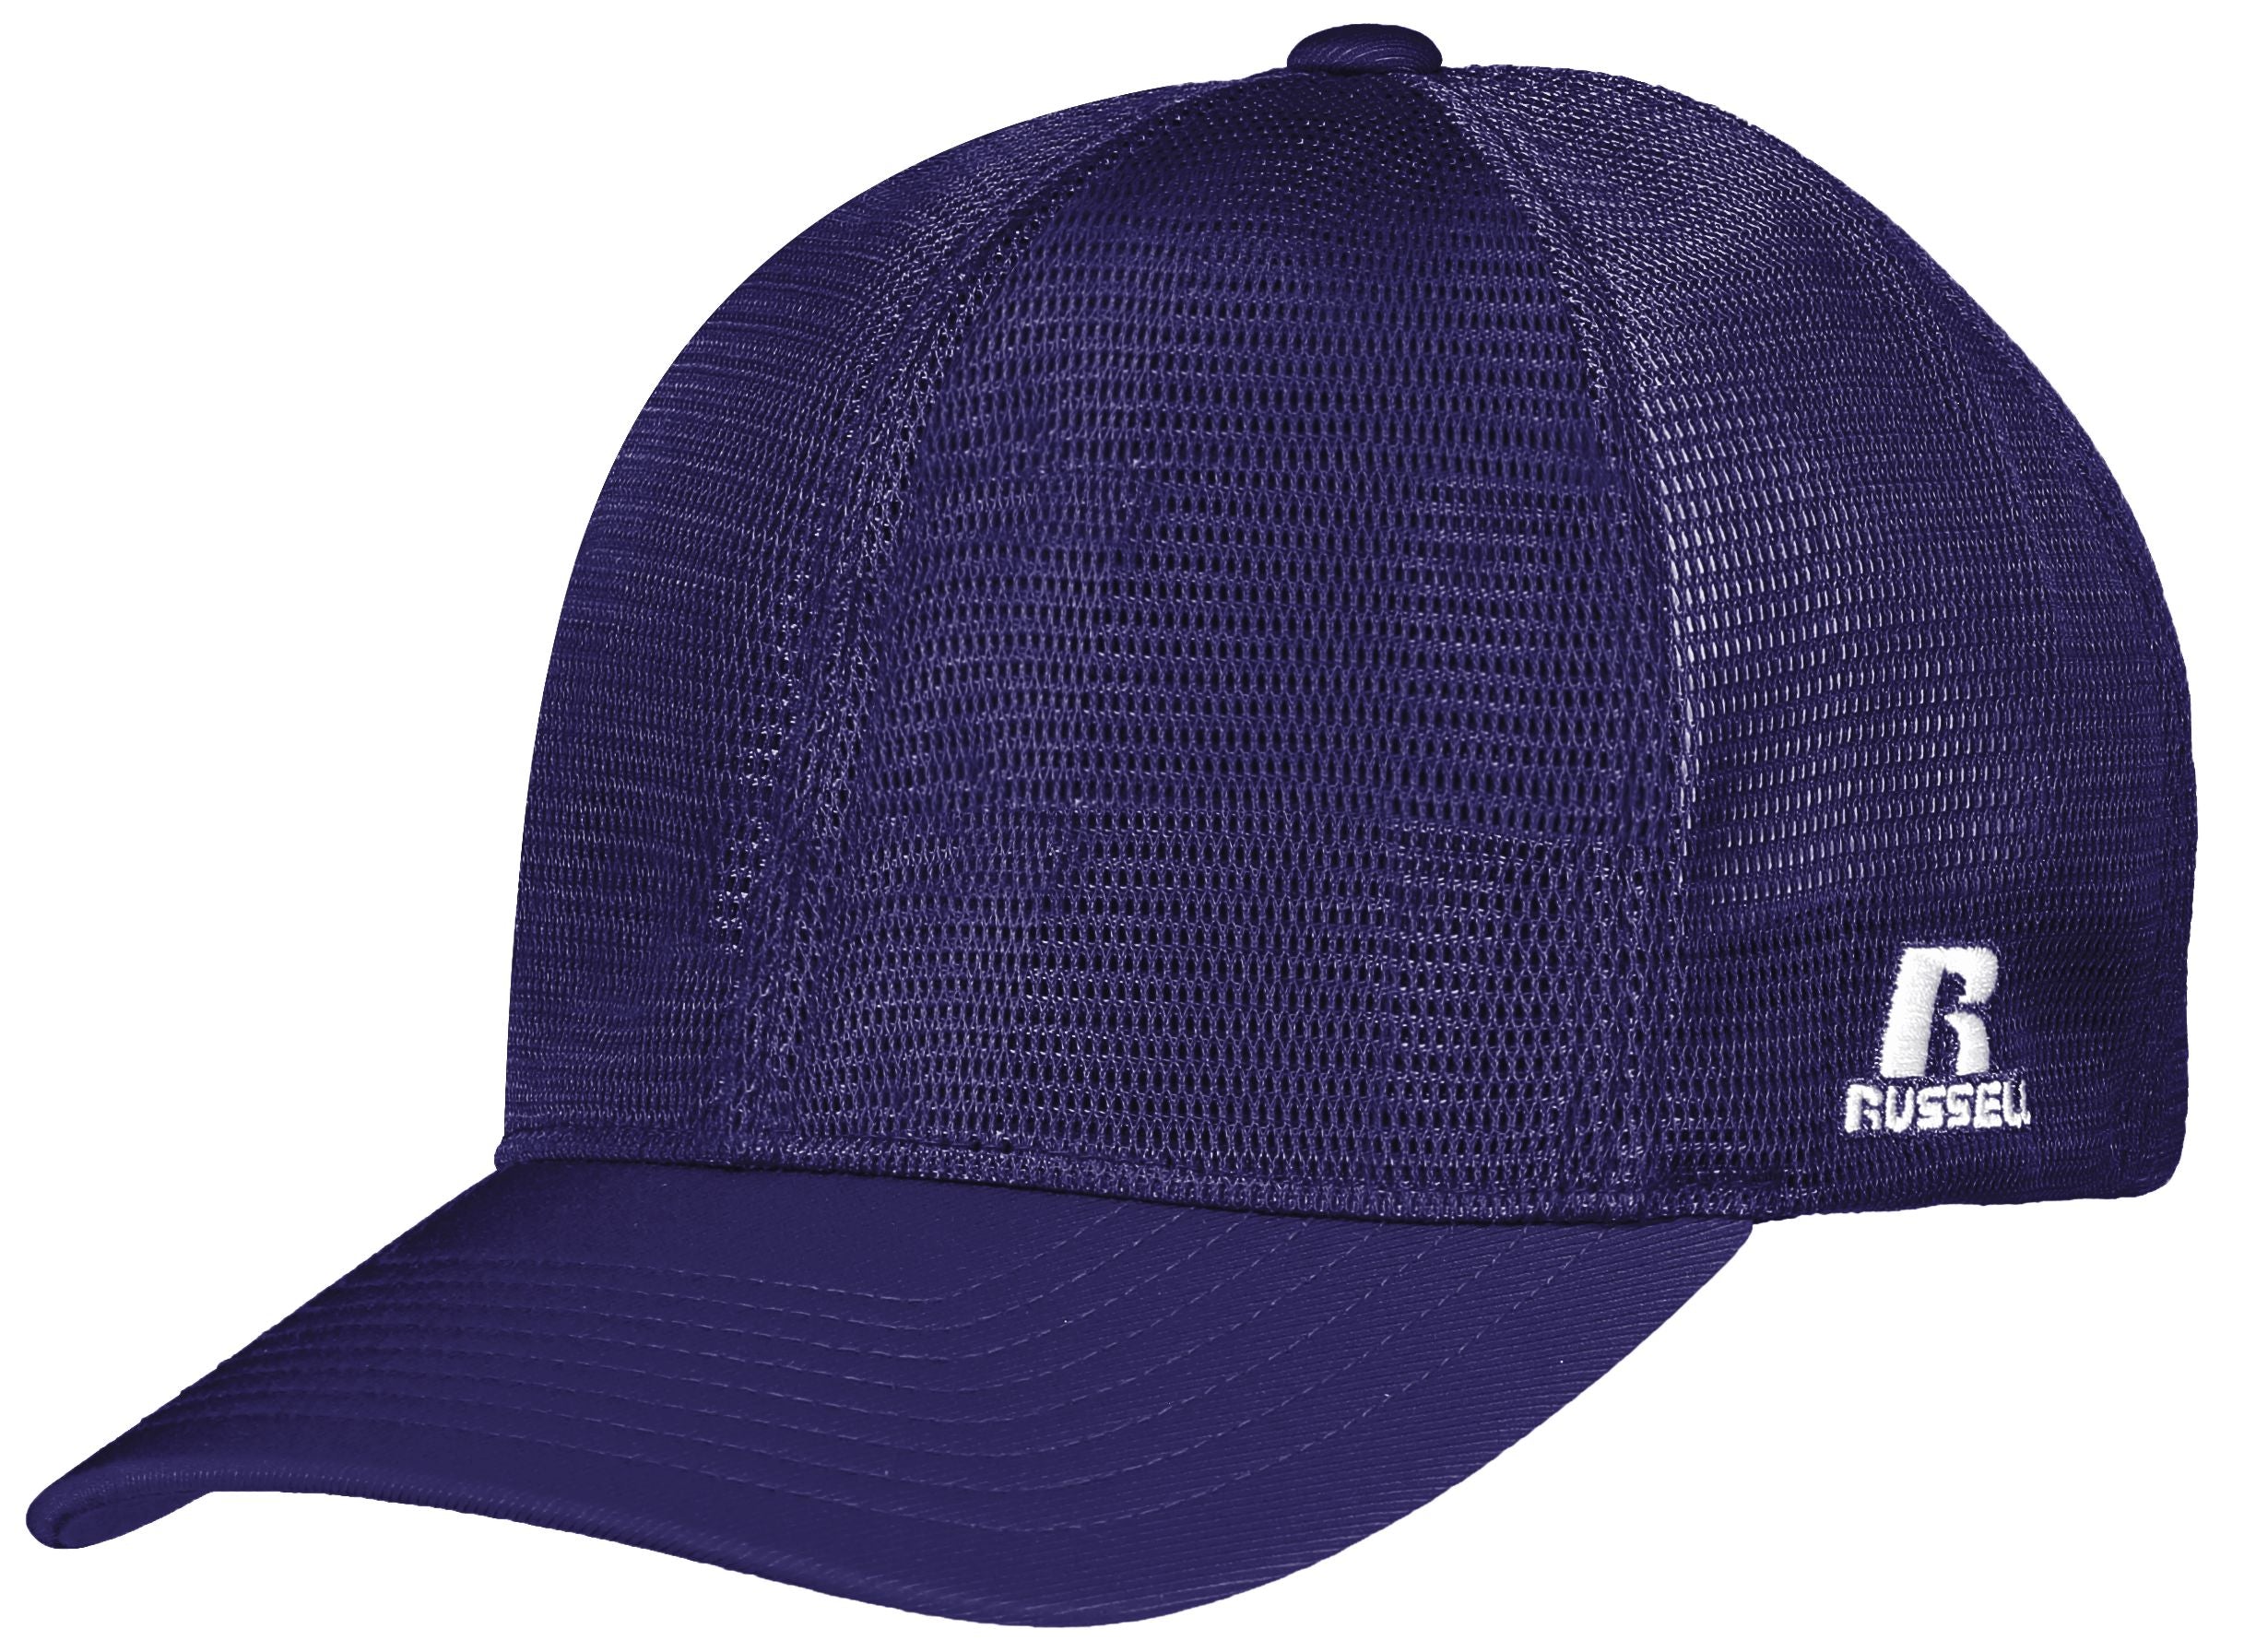 Russell Athletic Flexfit 360 Mesh Cap in Purple  -Part of the Adult, Headwear, Headwear-Cap, Russell-Athletic-Products product lines at KanaleyCreations.com